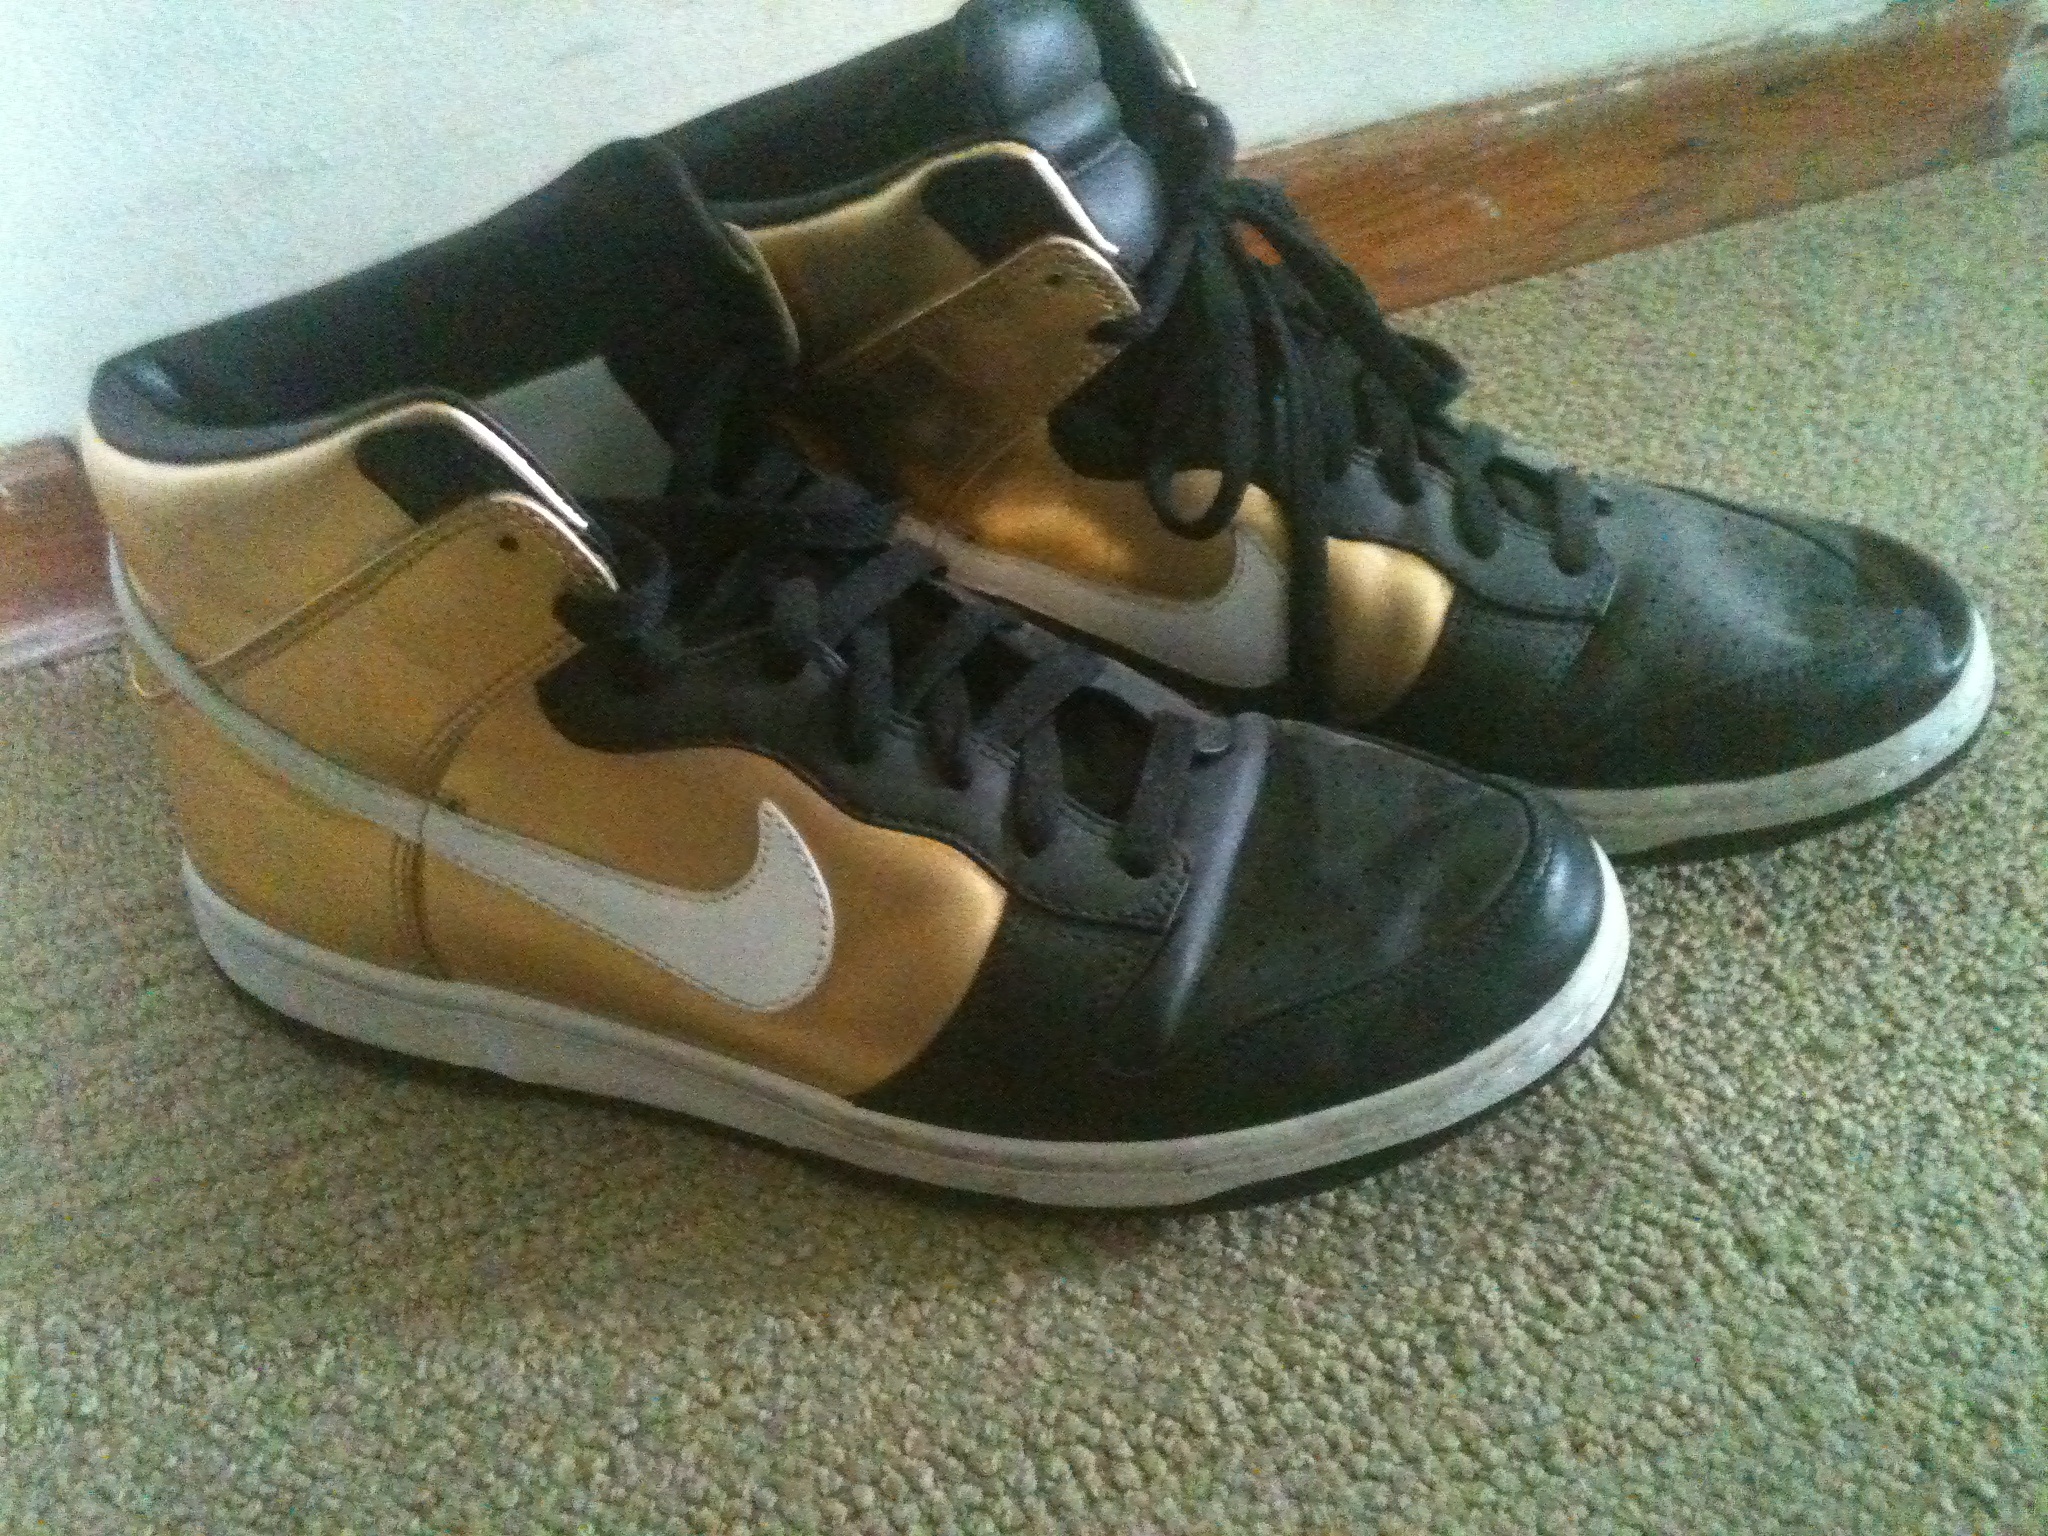 Pair of gold and black nikes